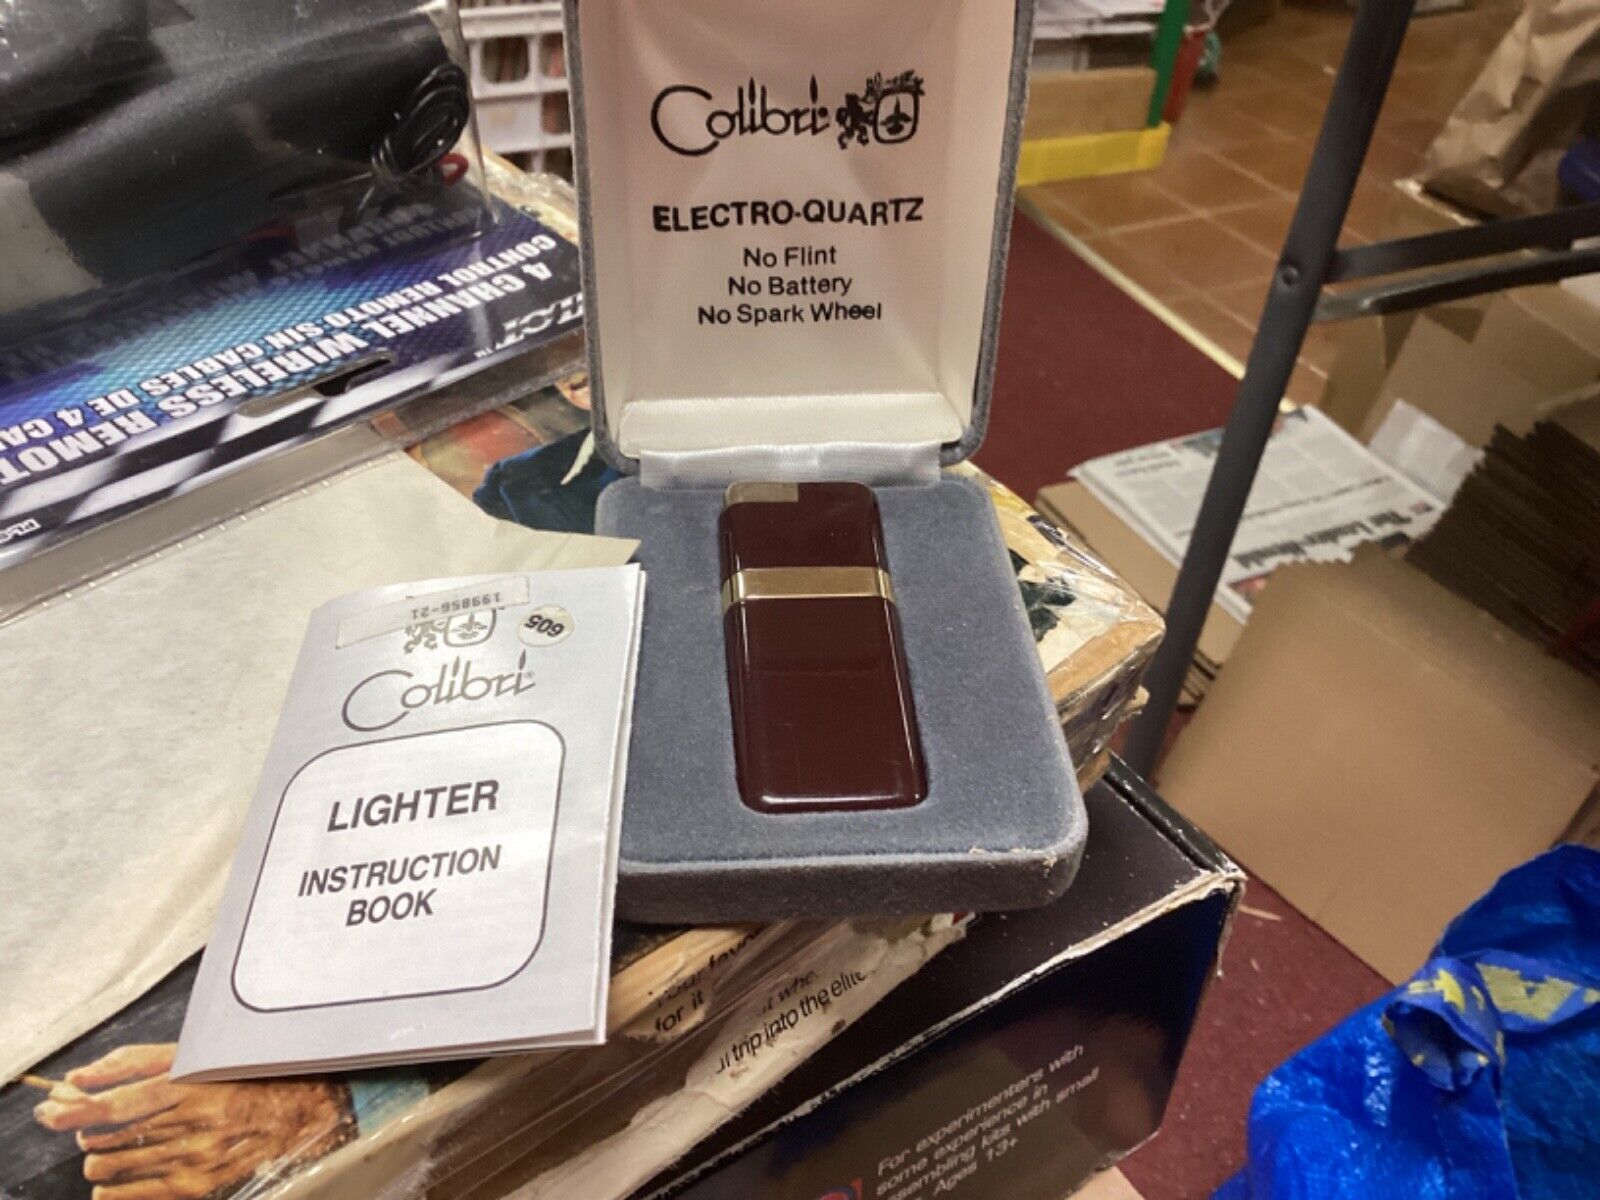 Vintage Colibri Electro Quartz Lighter Brown and Gold with Box